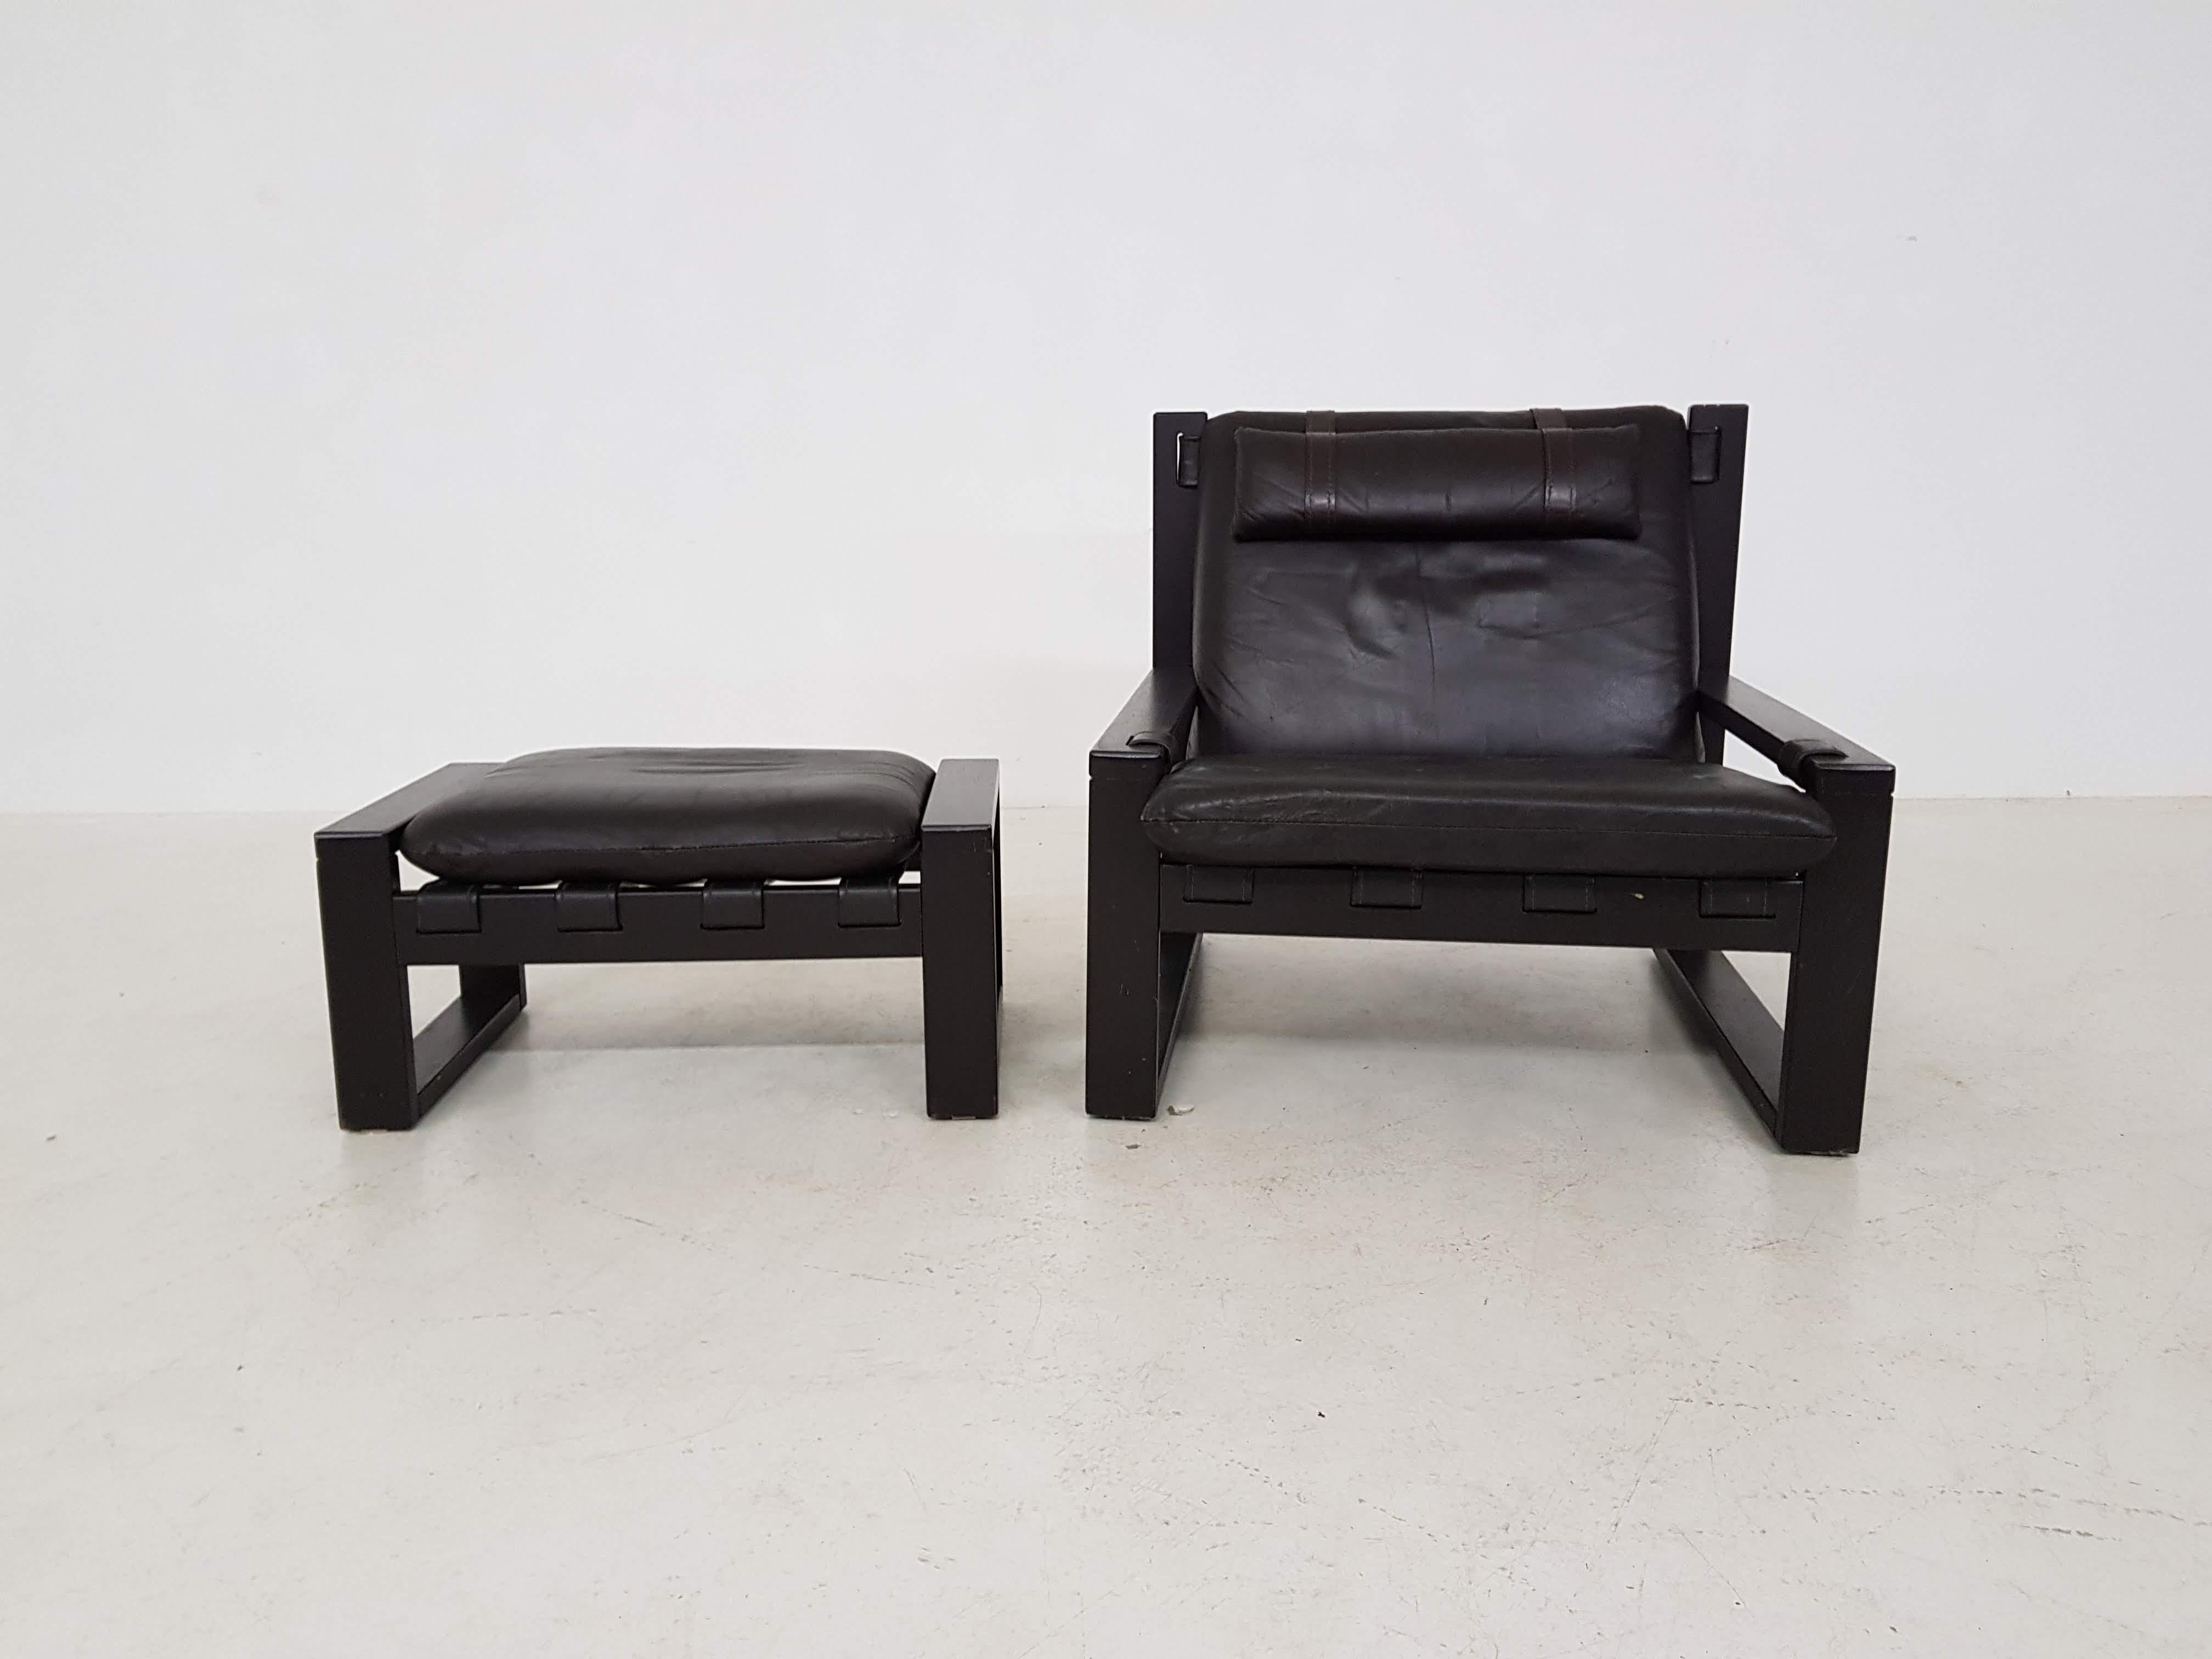 20th Century Brutalist Lounge Chair and Ottoman by Sonja Wasseur, Dutch Design, 1970s